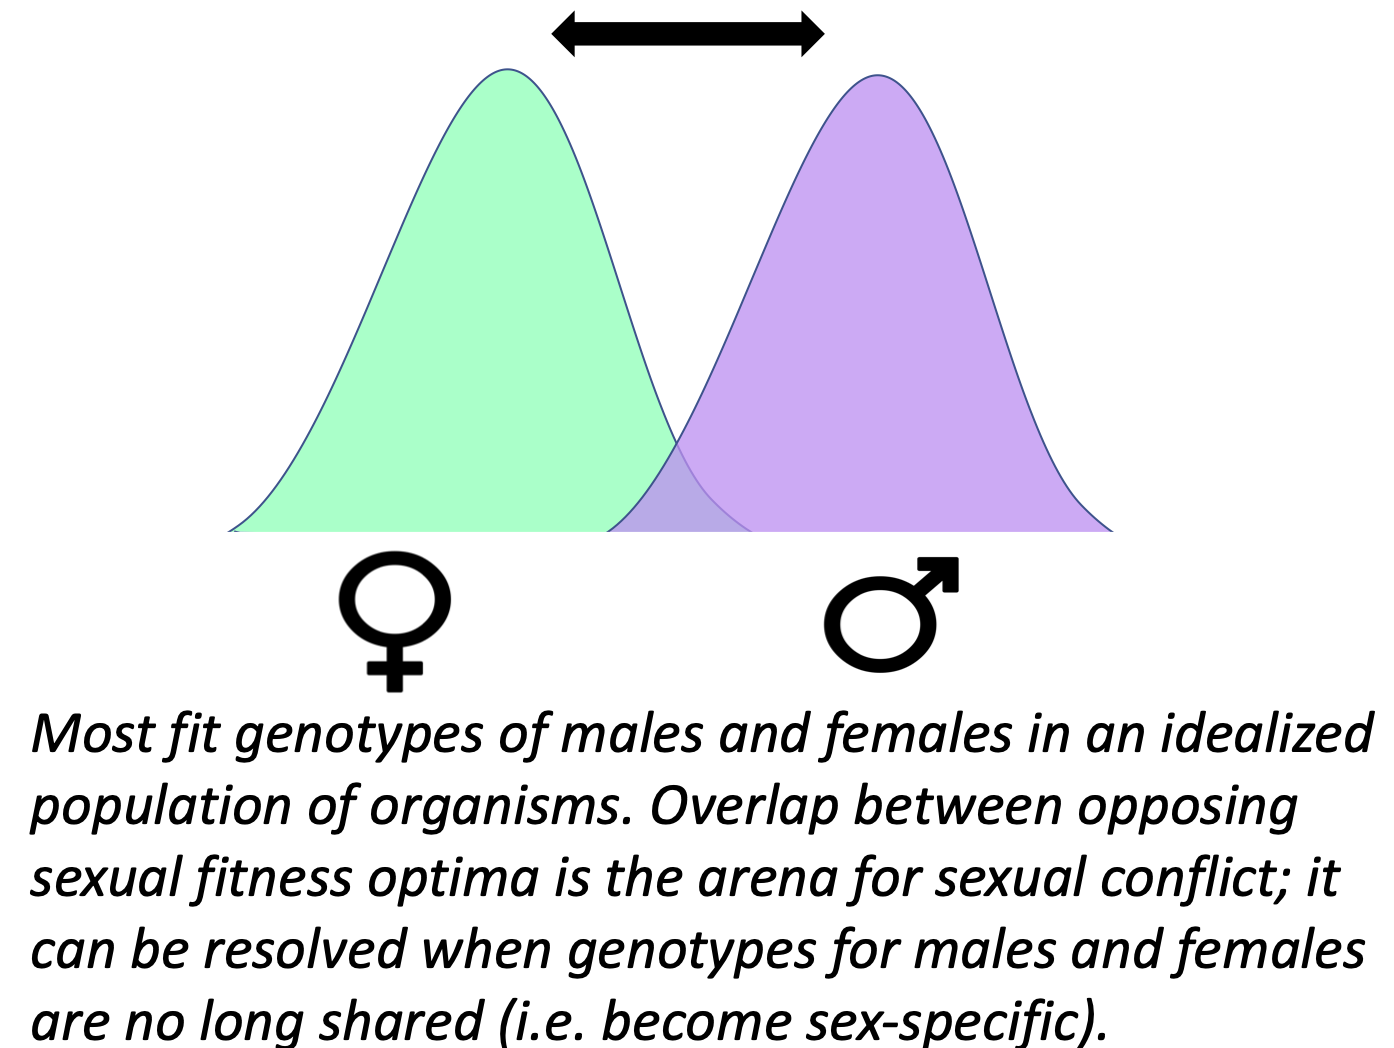 A figure showing two peaks representing male and female fitness optima. An arrow between them shows that they are not static and can movetowards each other or away.